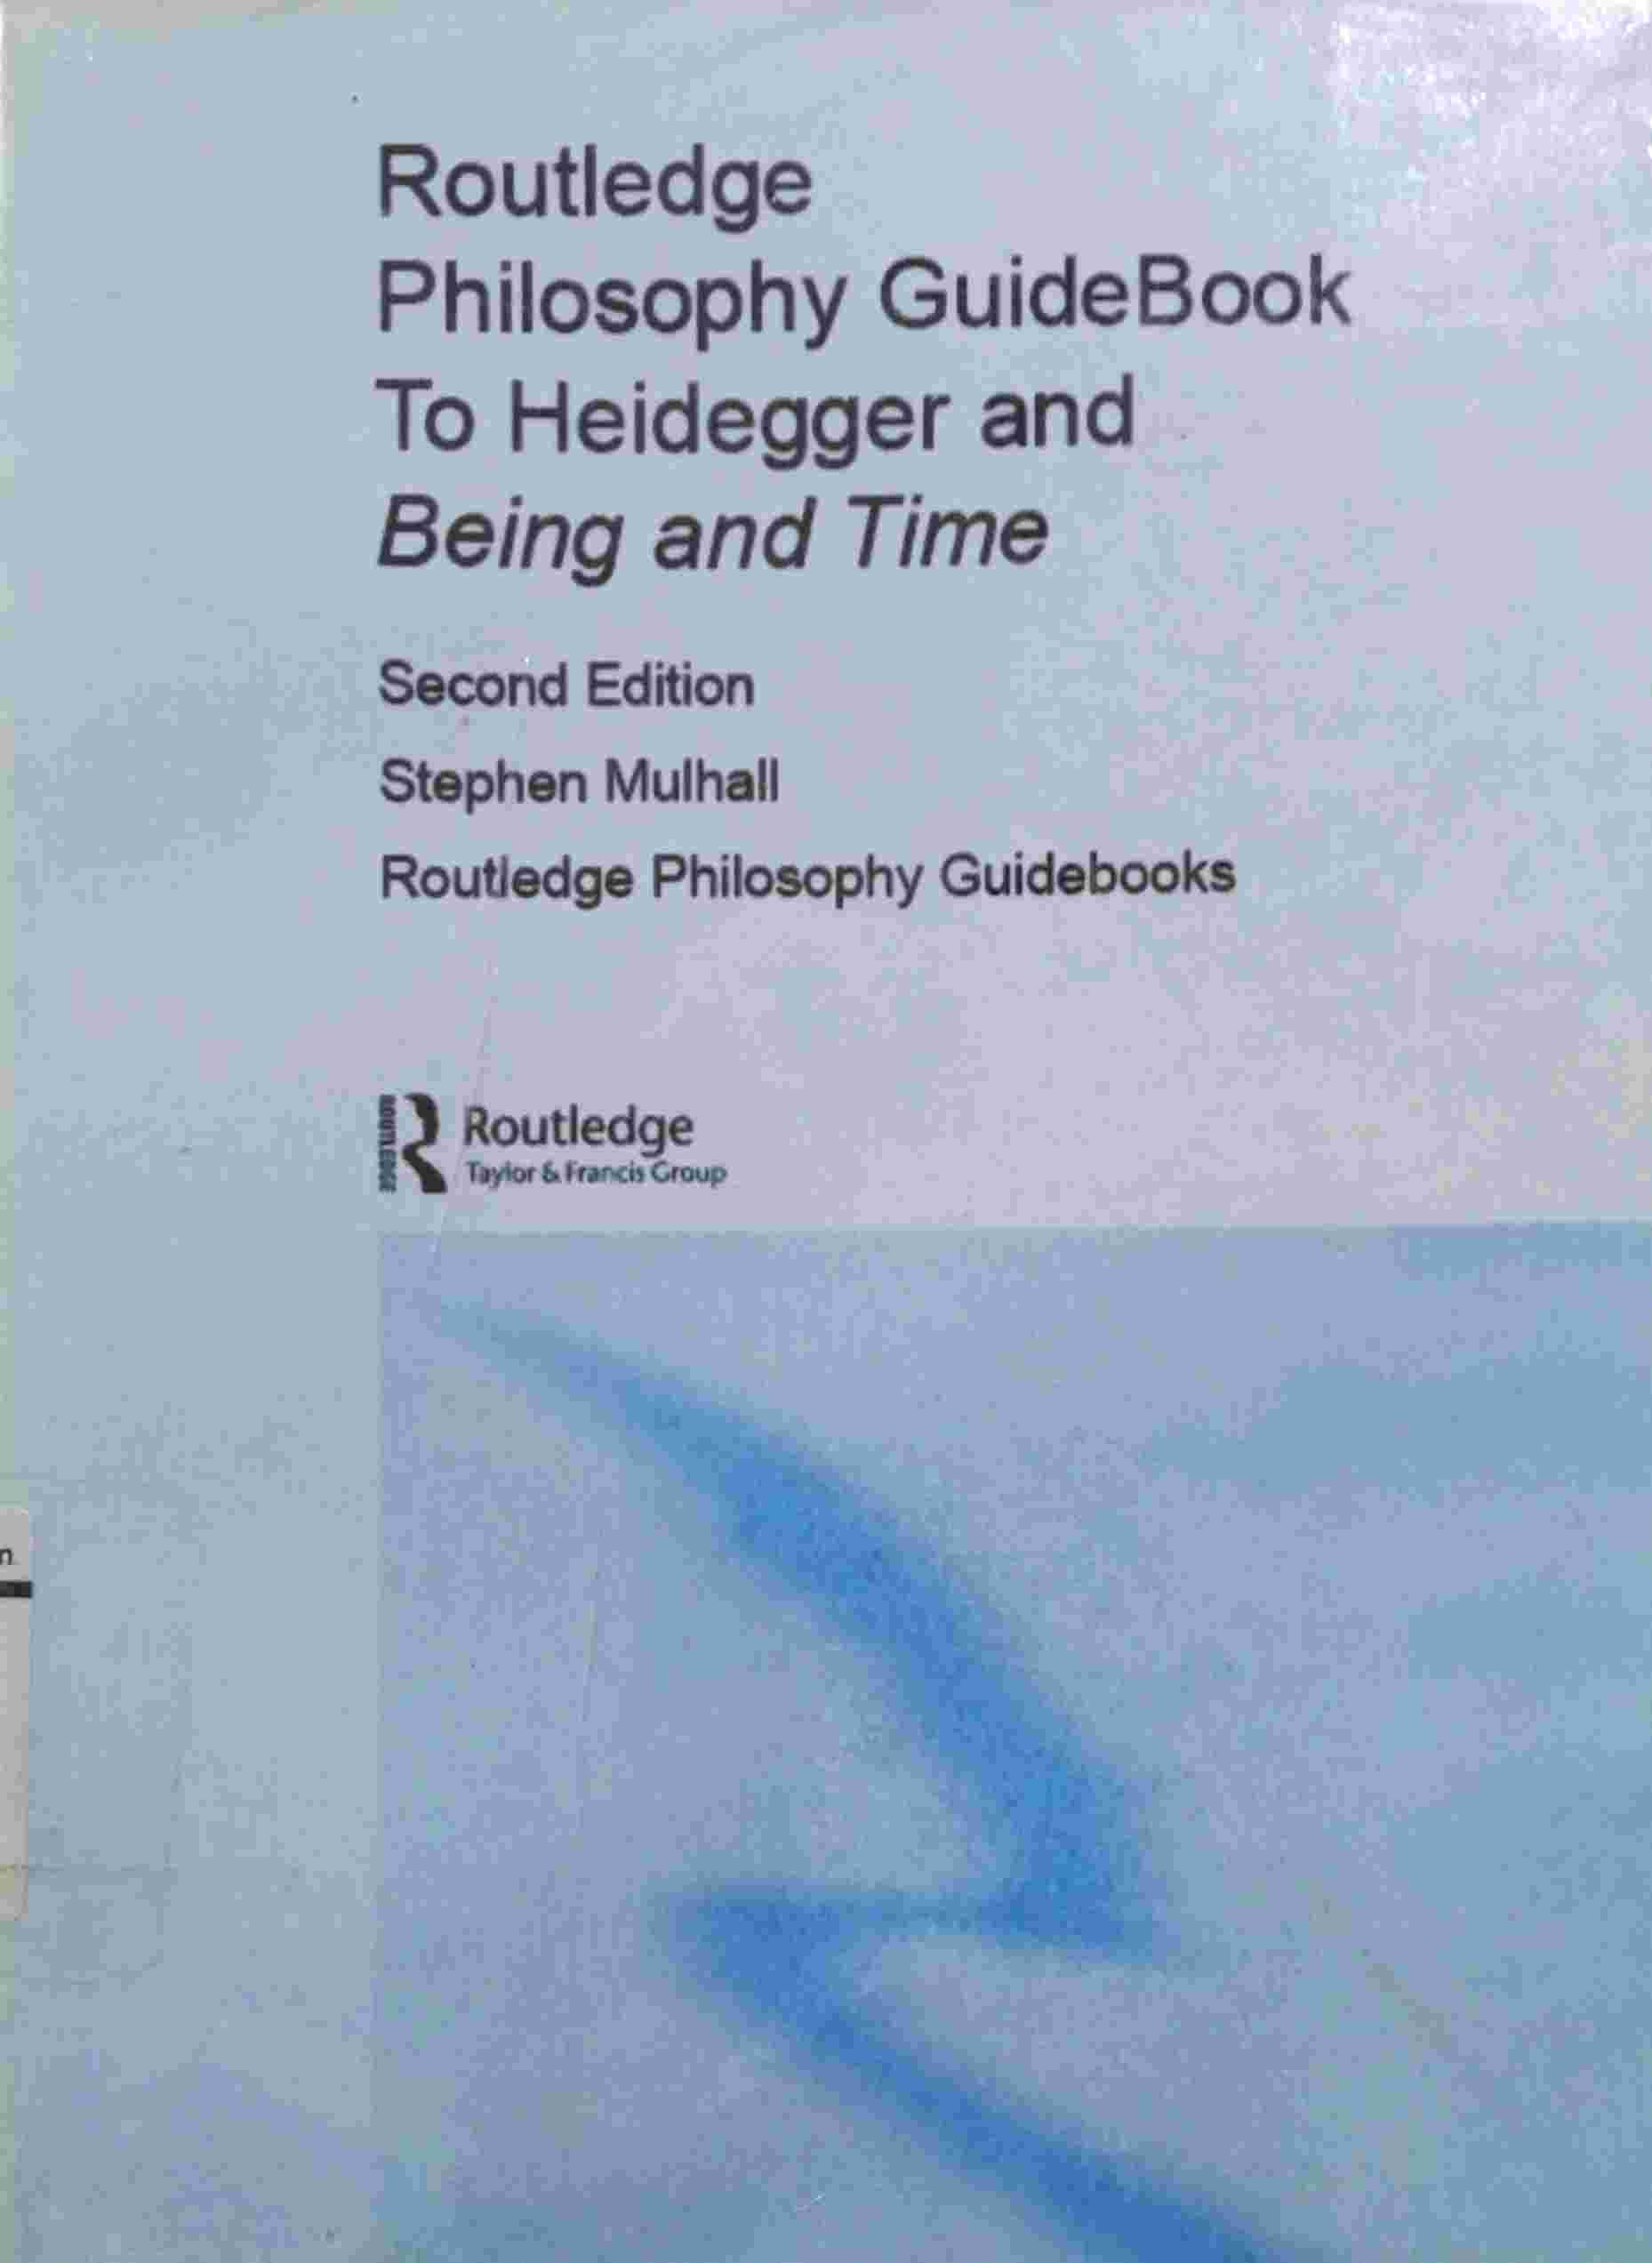 ROUTLEDGE PHILOSOPHY GUIDEBOOK TO HEIDEGGER AND BEING AND TIME